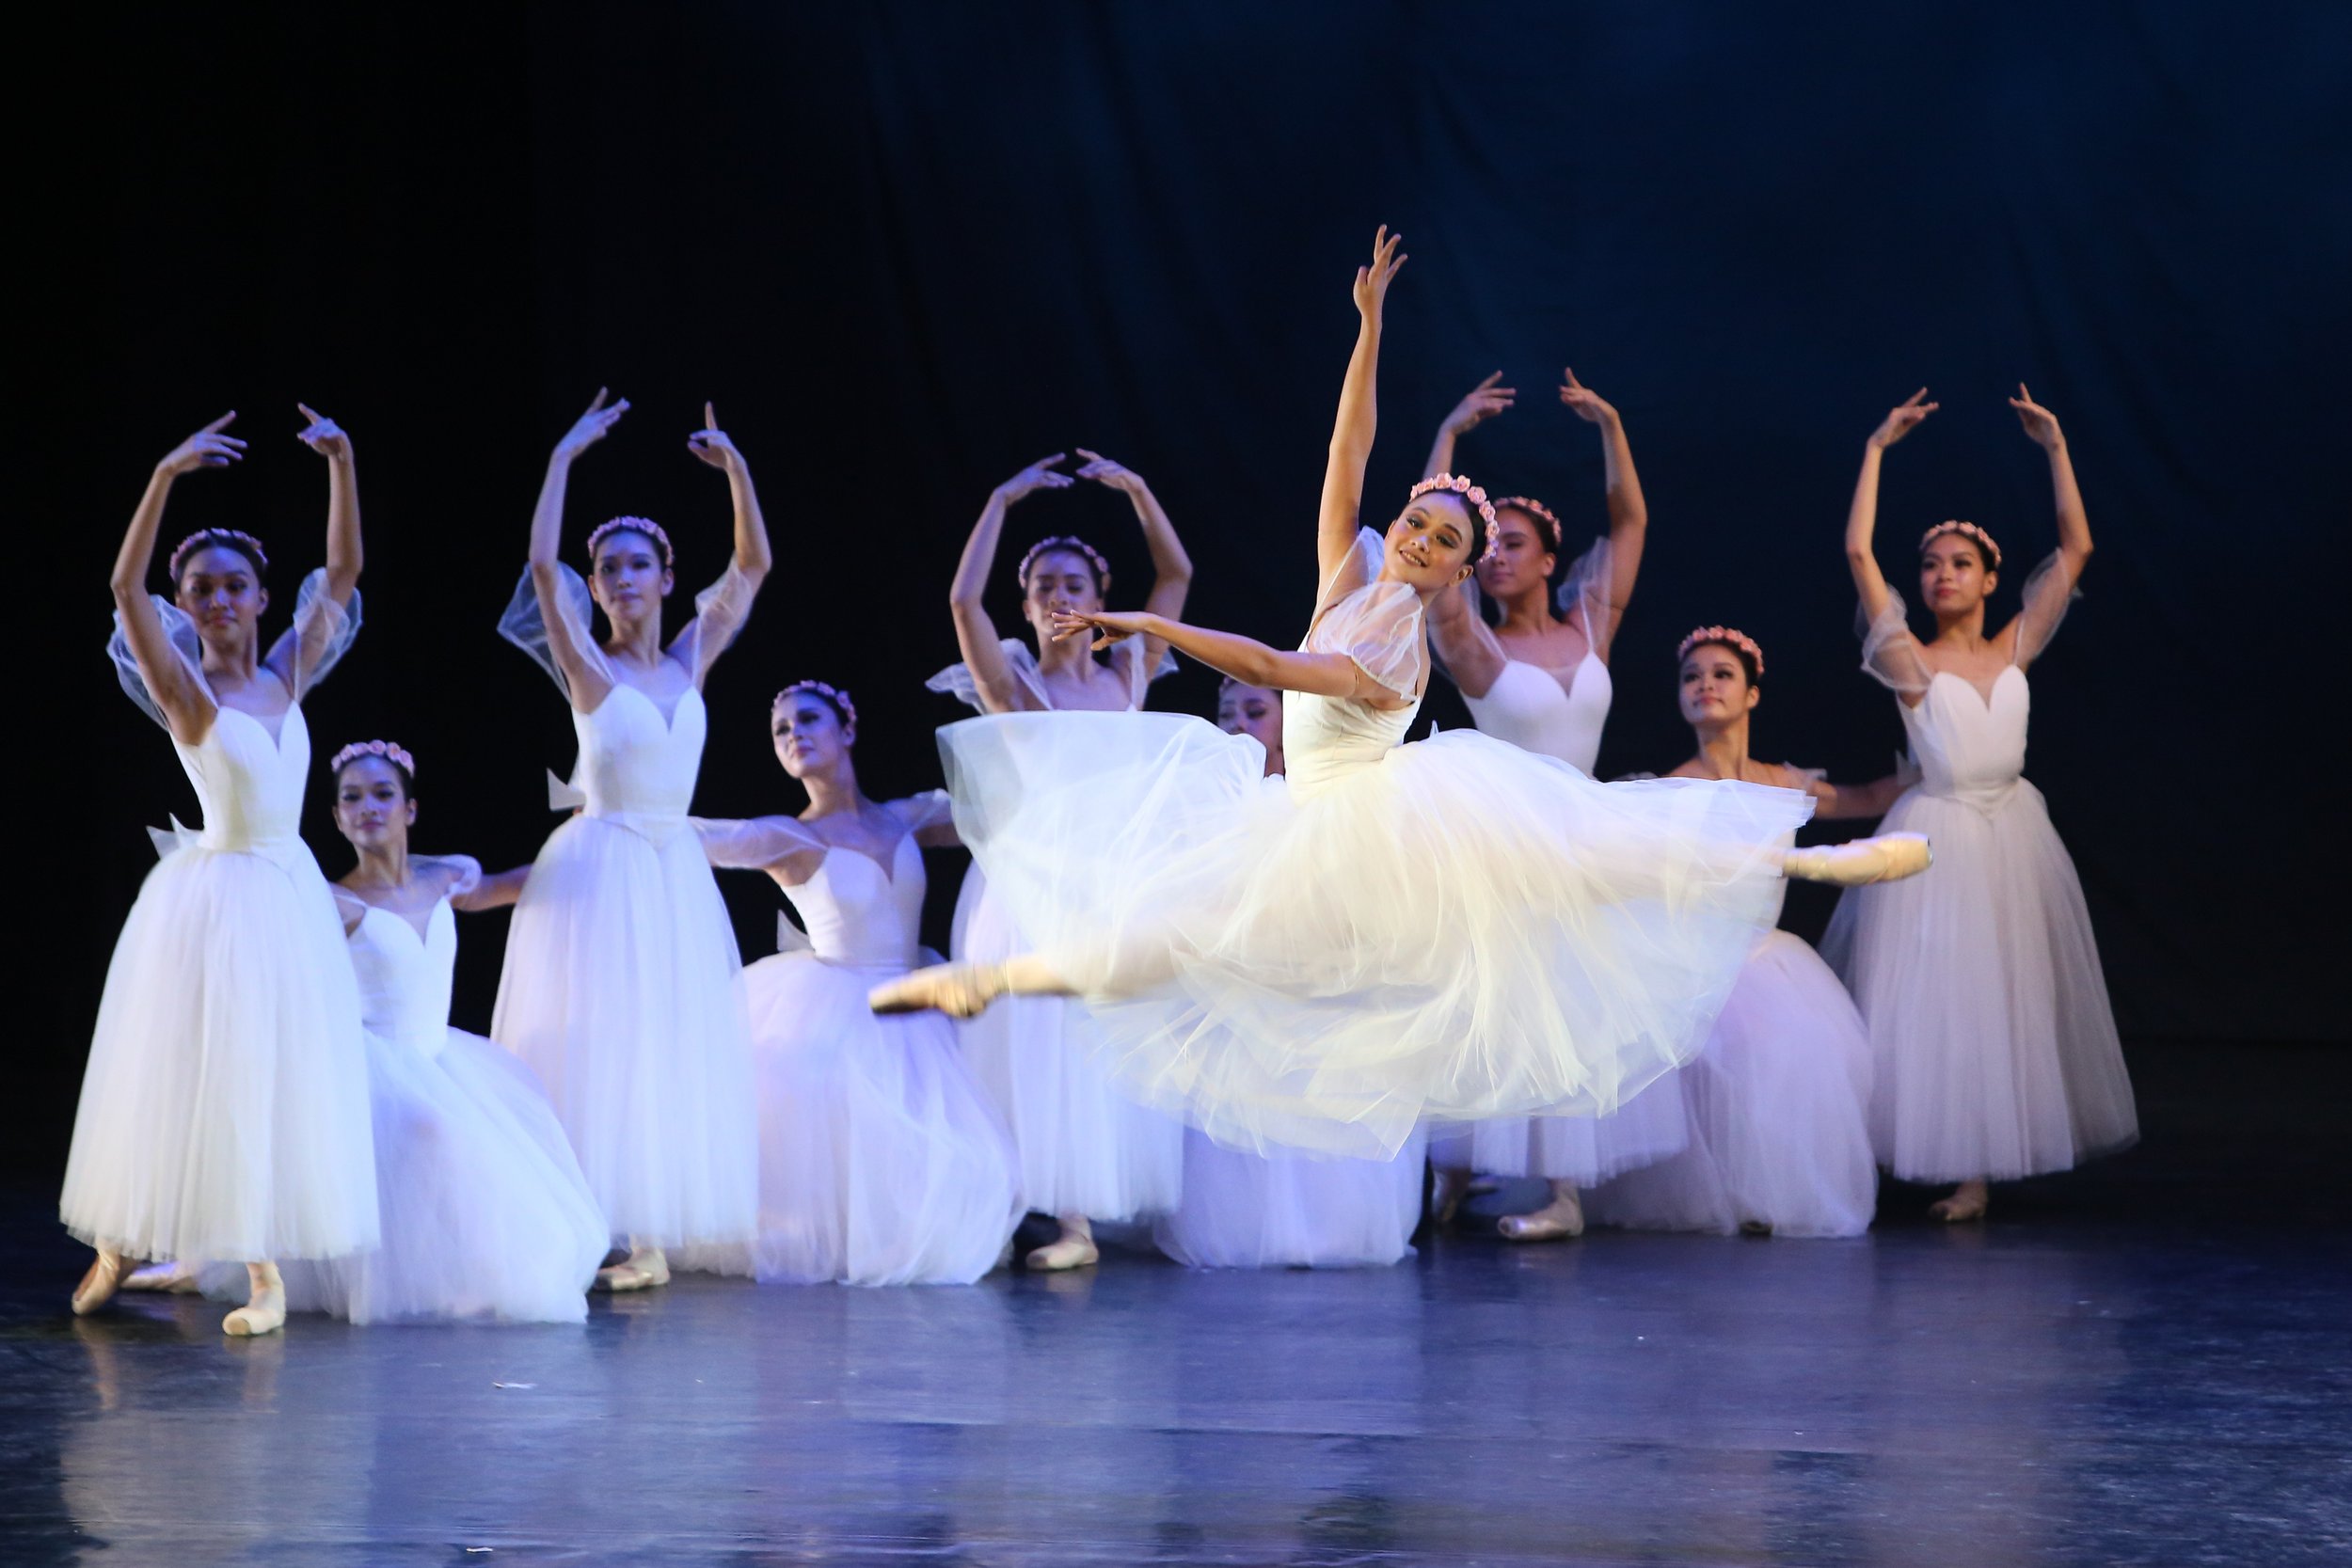    Ballerinas led by Rissa May Camaclang wear crowns of delicate roses on their head, adding to the ethereal feel of  Les Sylphides  (2019). Also known as  Chopiniana , the white ballet about a poet’s search for inspiration in the forest was staged a